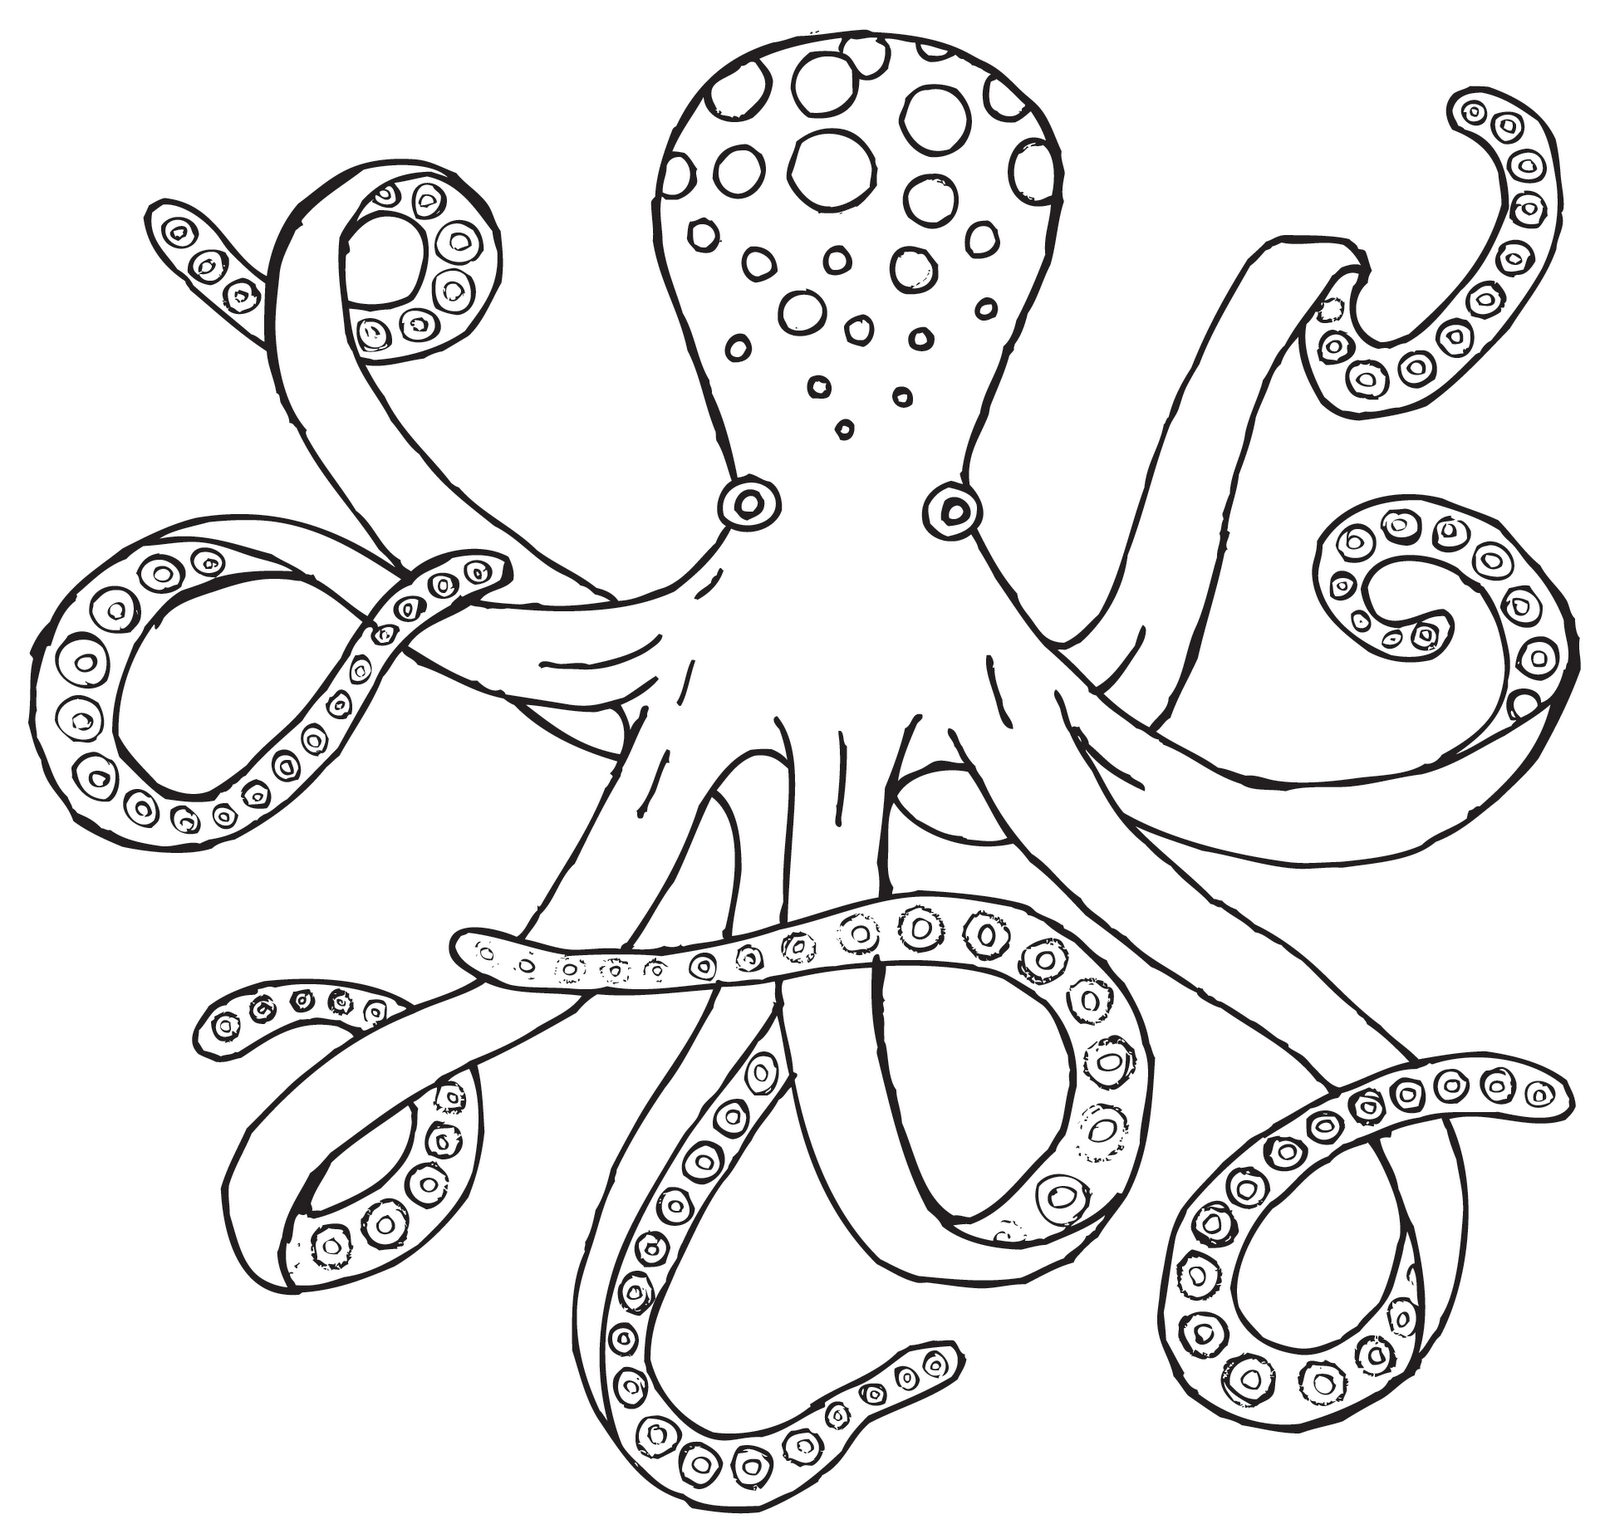 printable-octopus-outline-printable-word-searches